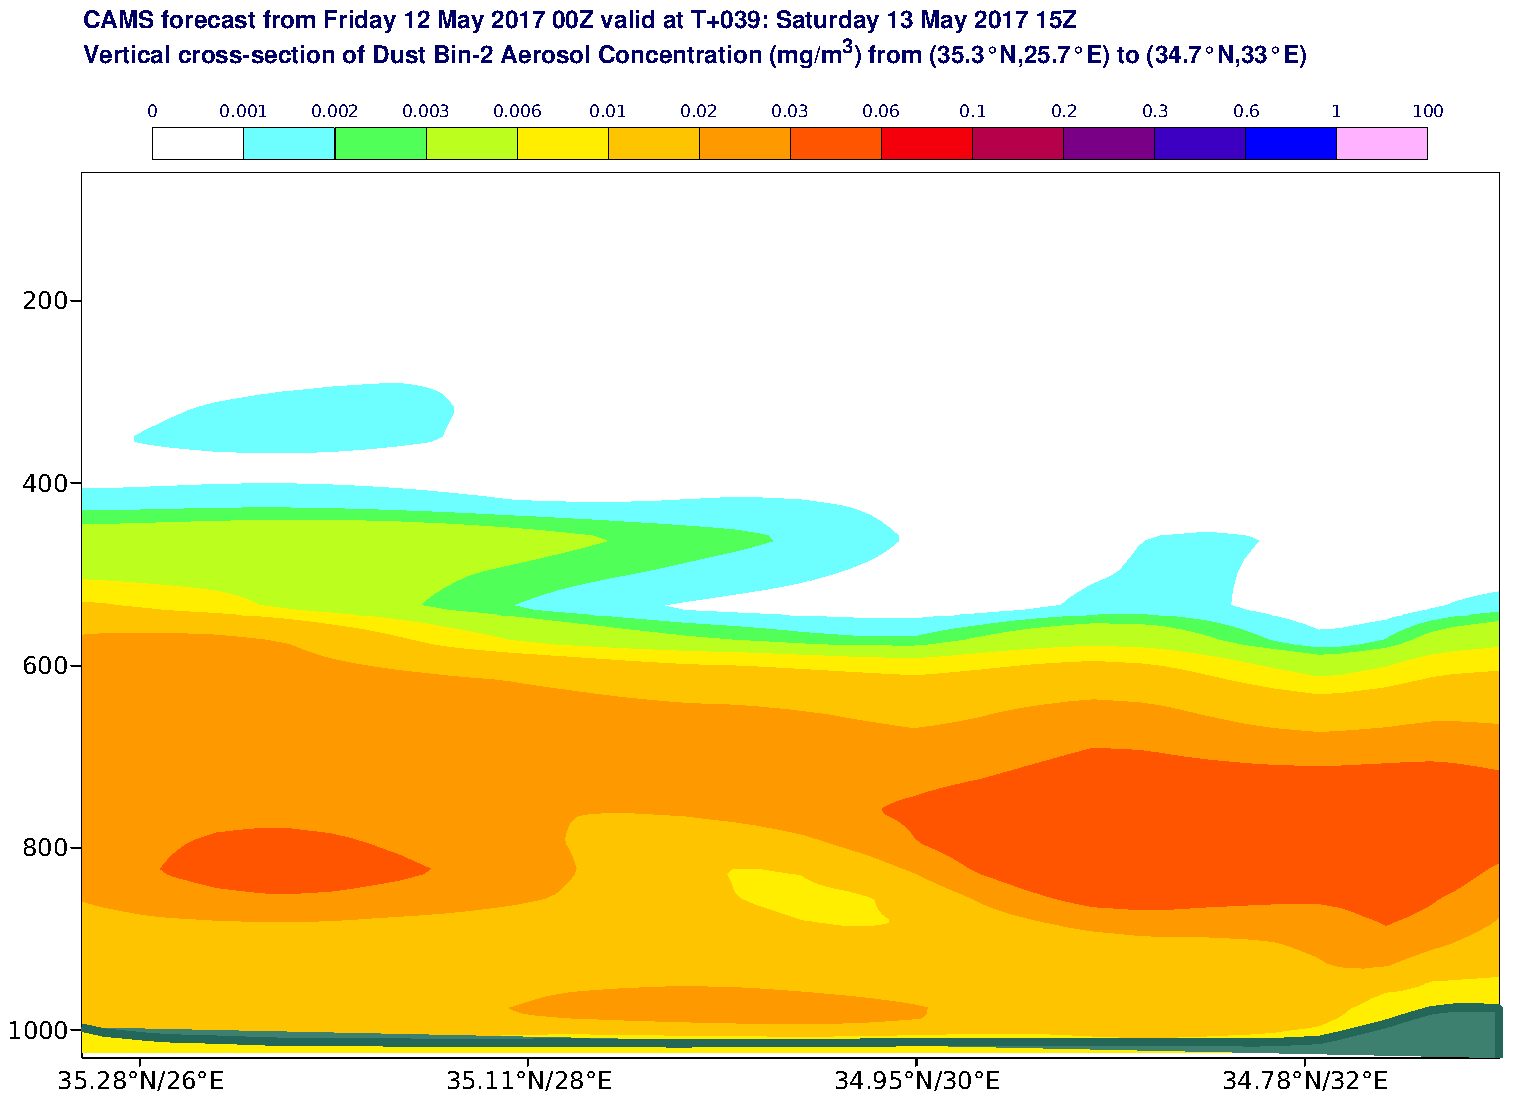 Vertical cross-section of Dust Bin-2 Aerosol Concentration (mg/m3) valid at T39 - 2017-05-13 15:00